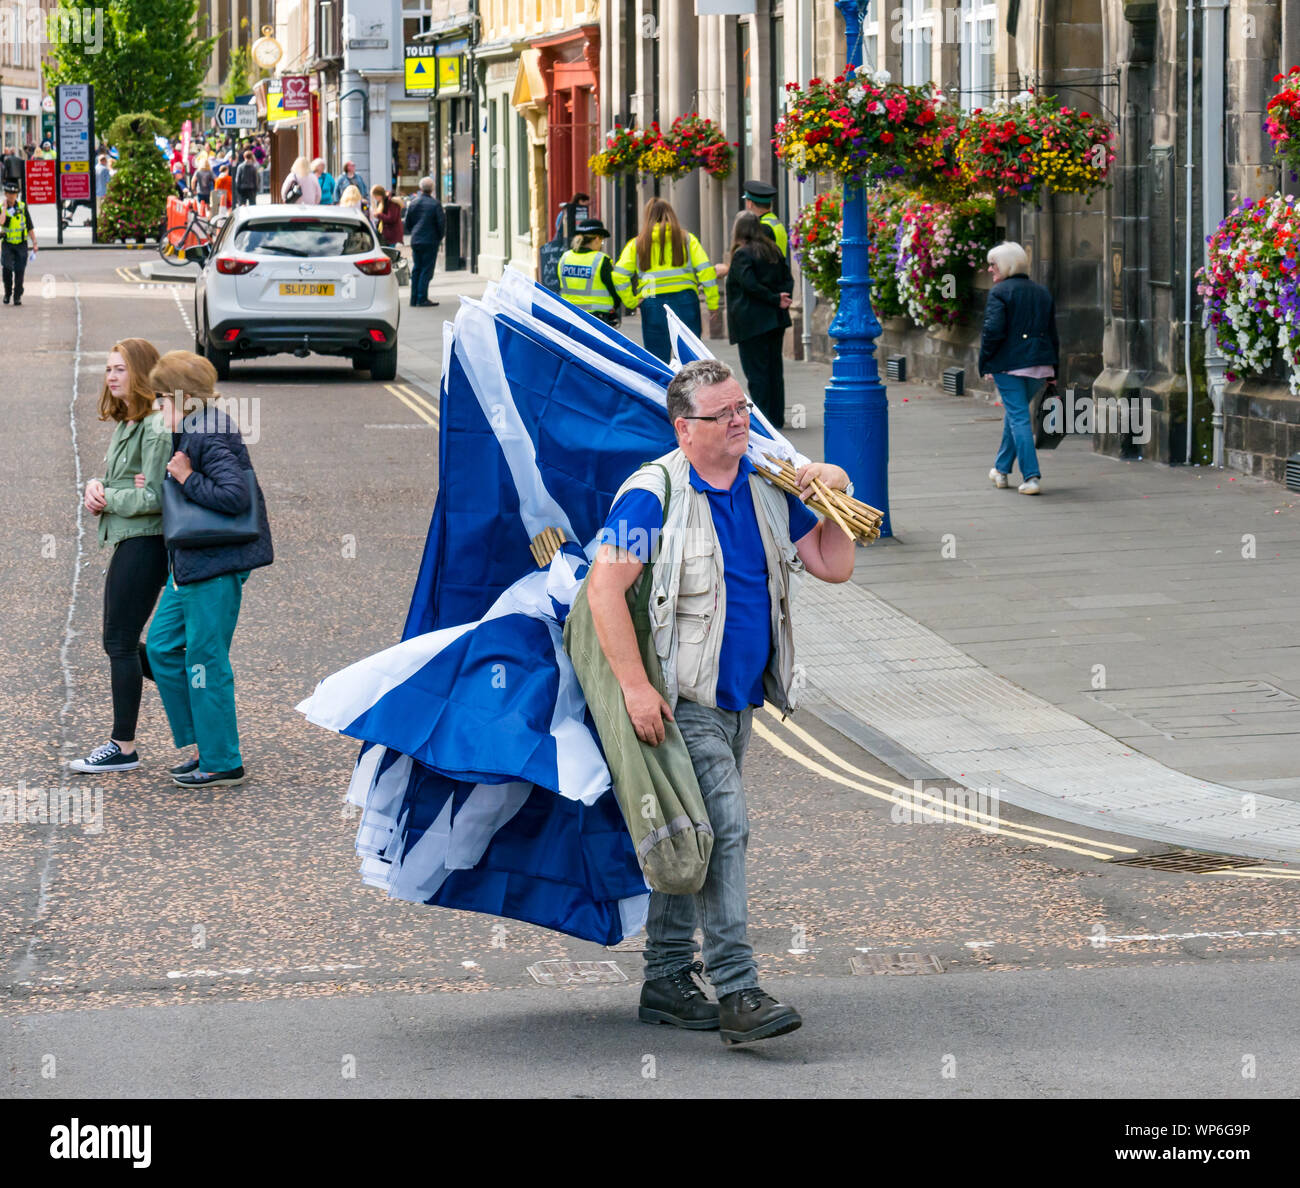 Perth, Scotland, United Kingdom, 7th September 2019. All Under One Banner Independence March: Independence supporters march through Perth in the 7th All Under One Banner (AUOB) march of this year. A saltire flag seller (flags £5 each) Stock Photo